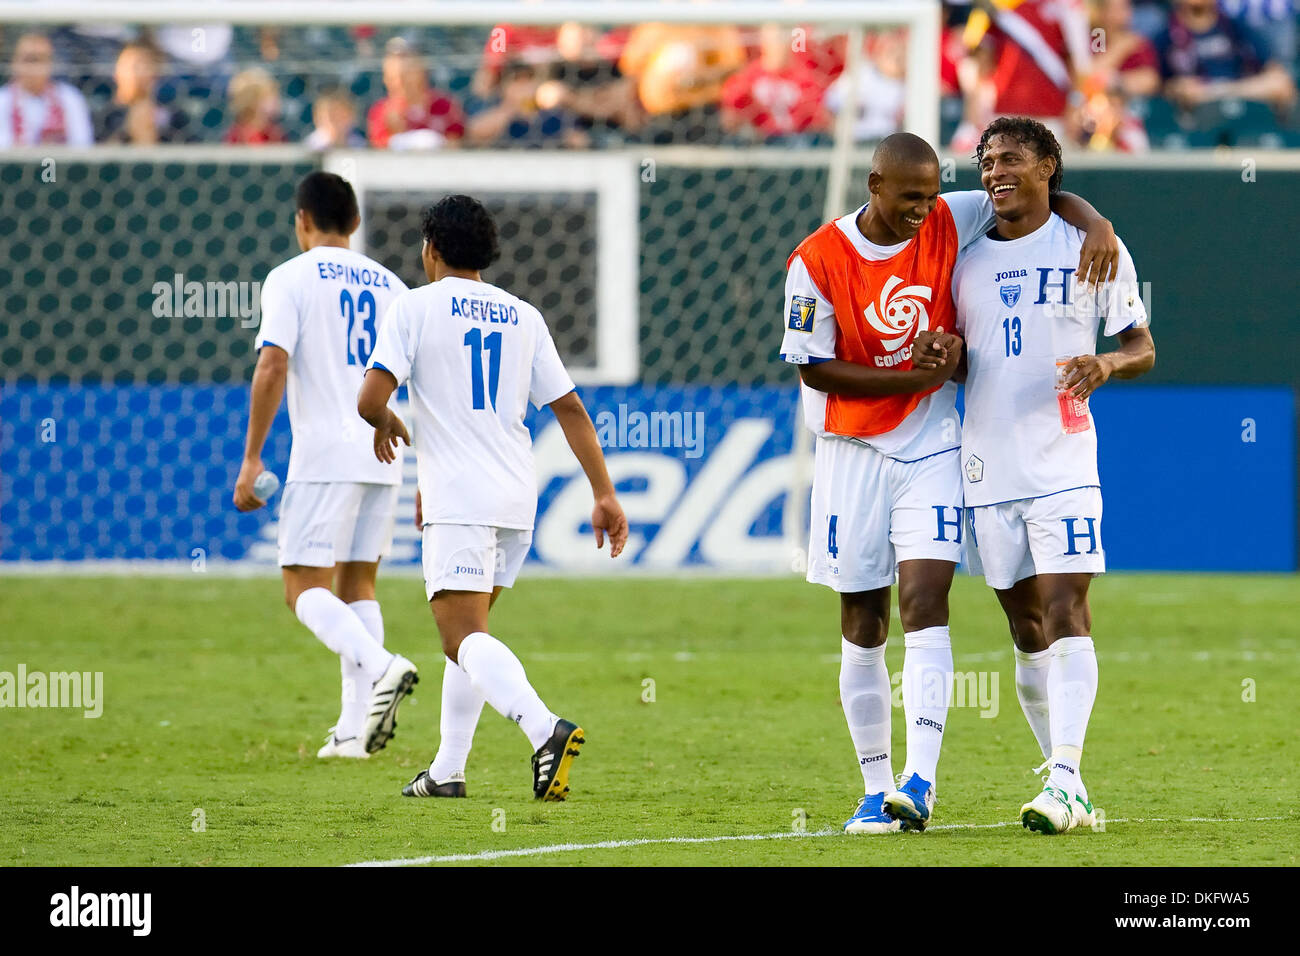 Jul 18, 2009 - Philadelphia, Pennsylvania, USA - Honduras' defender CARLOS PALACIOS (14) celebrating with Canada's defender ATIBA HUTCHINSON (13) as teammates  midfielder ROGER ESQINOZA (23) and defender MARIANO ACEVEDO (11) head to the rest of their teammates during the CONCACAF Gold Cup quarter finals match between Canada and Honduras at Lincoln Financial Field in Philadelphia, P Stock Photo